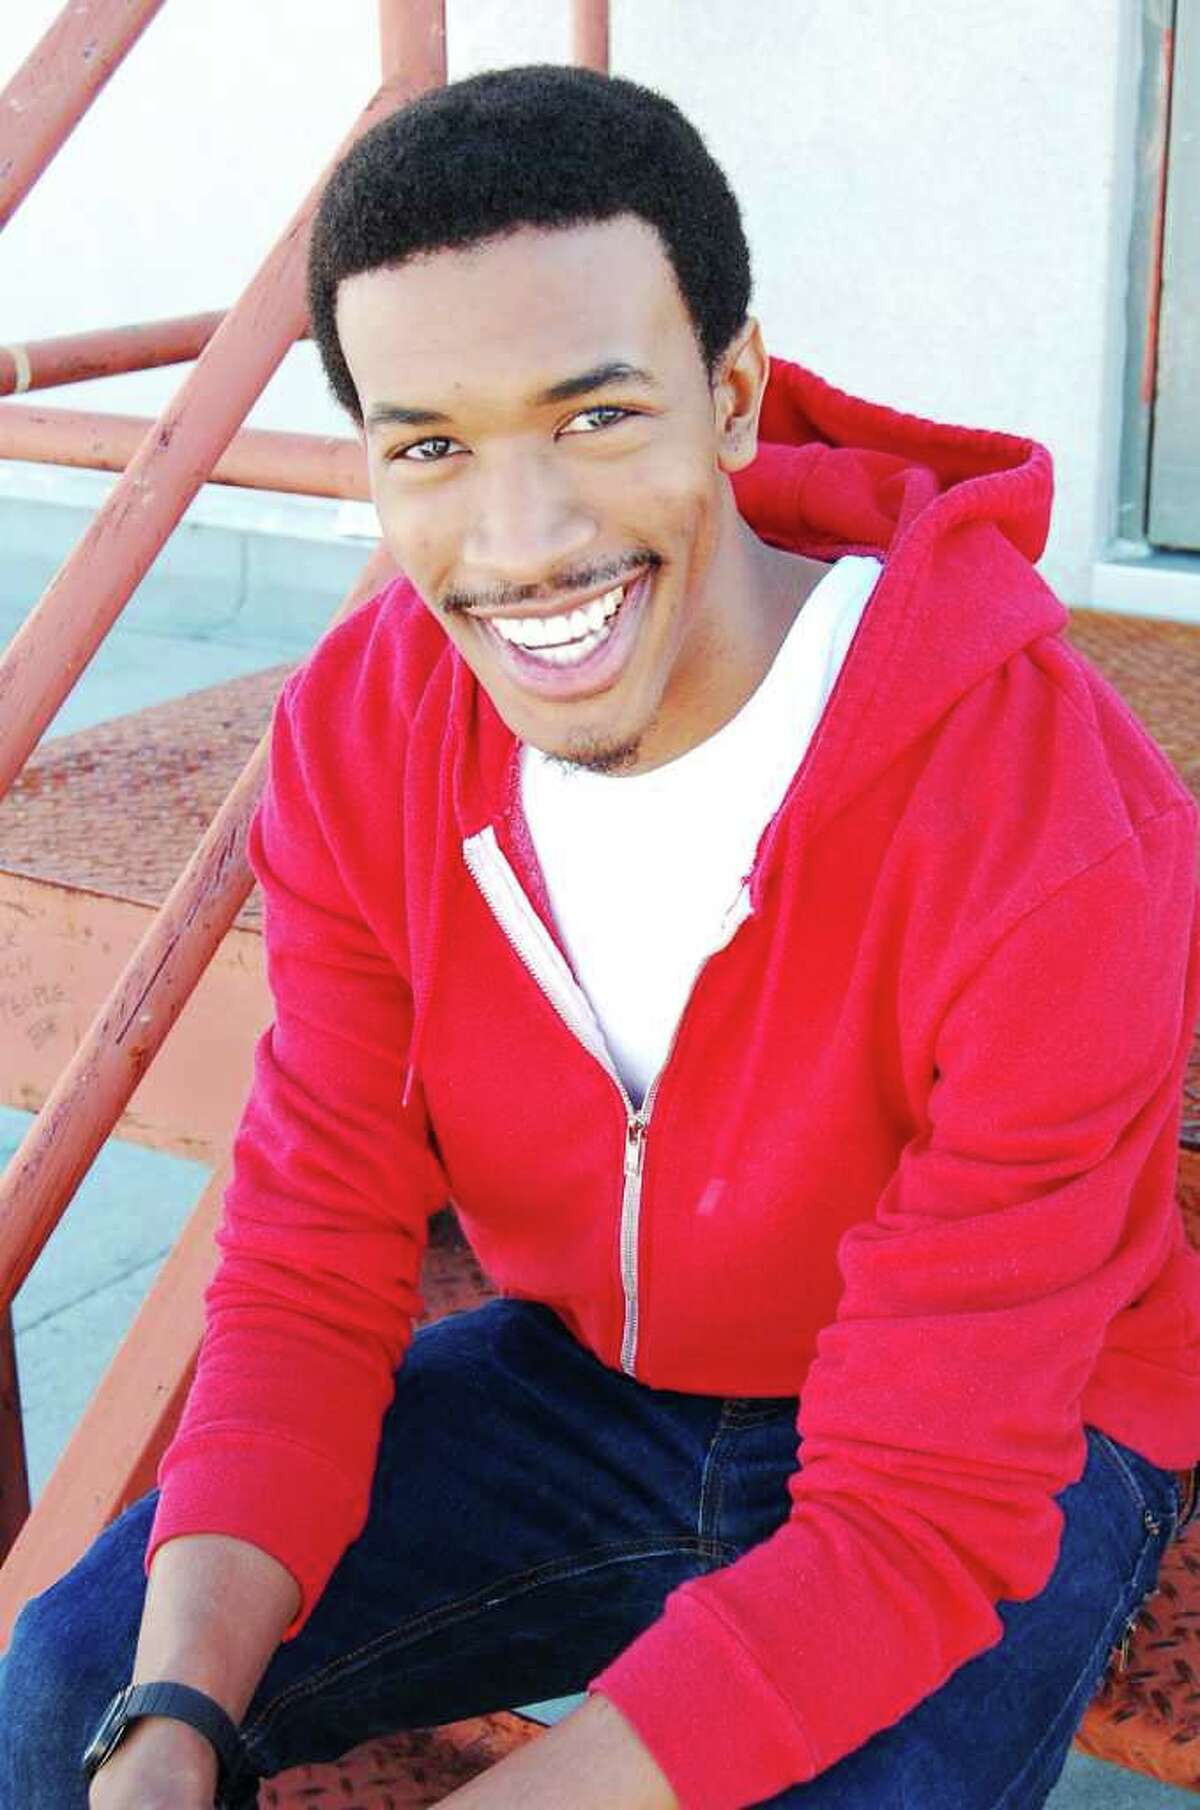 COURTESY PHOTO TRIPLE THREAT: Justin Prescott, who sings, dances and acts, is performing in Memphis.